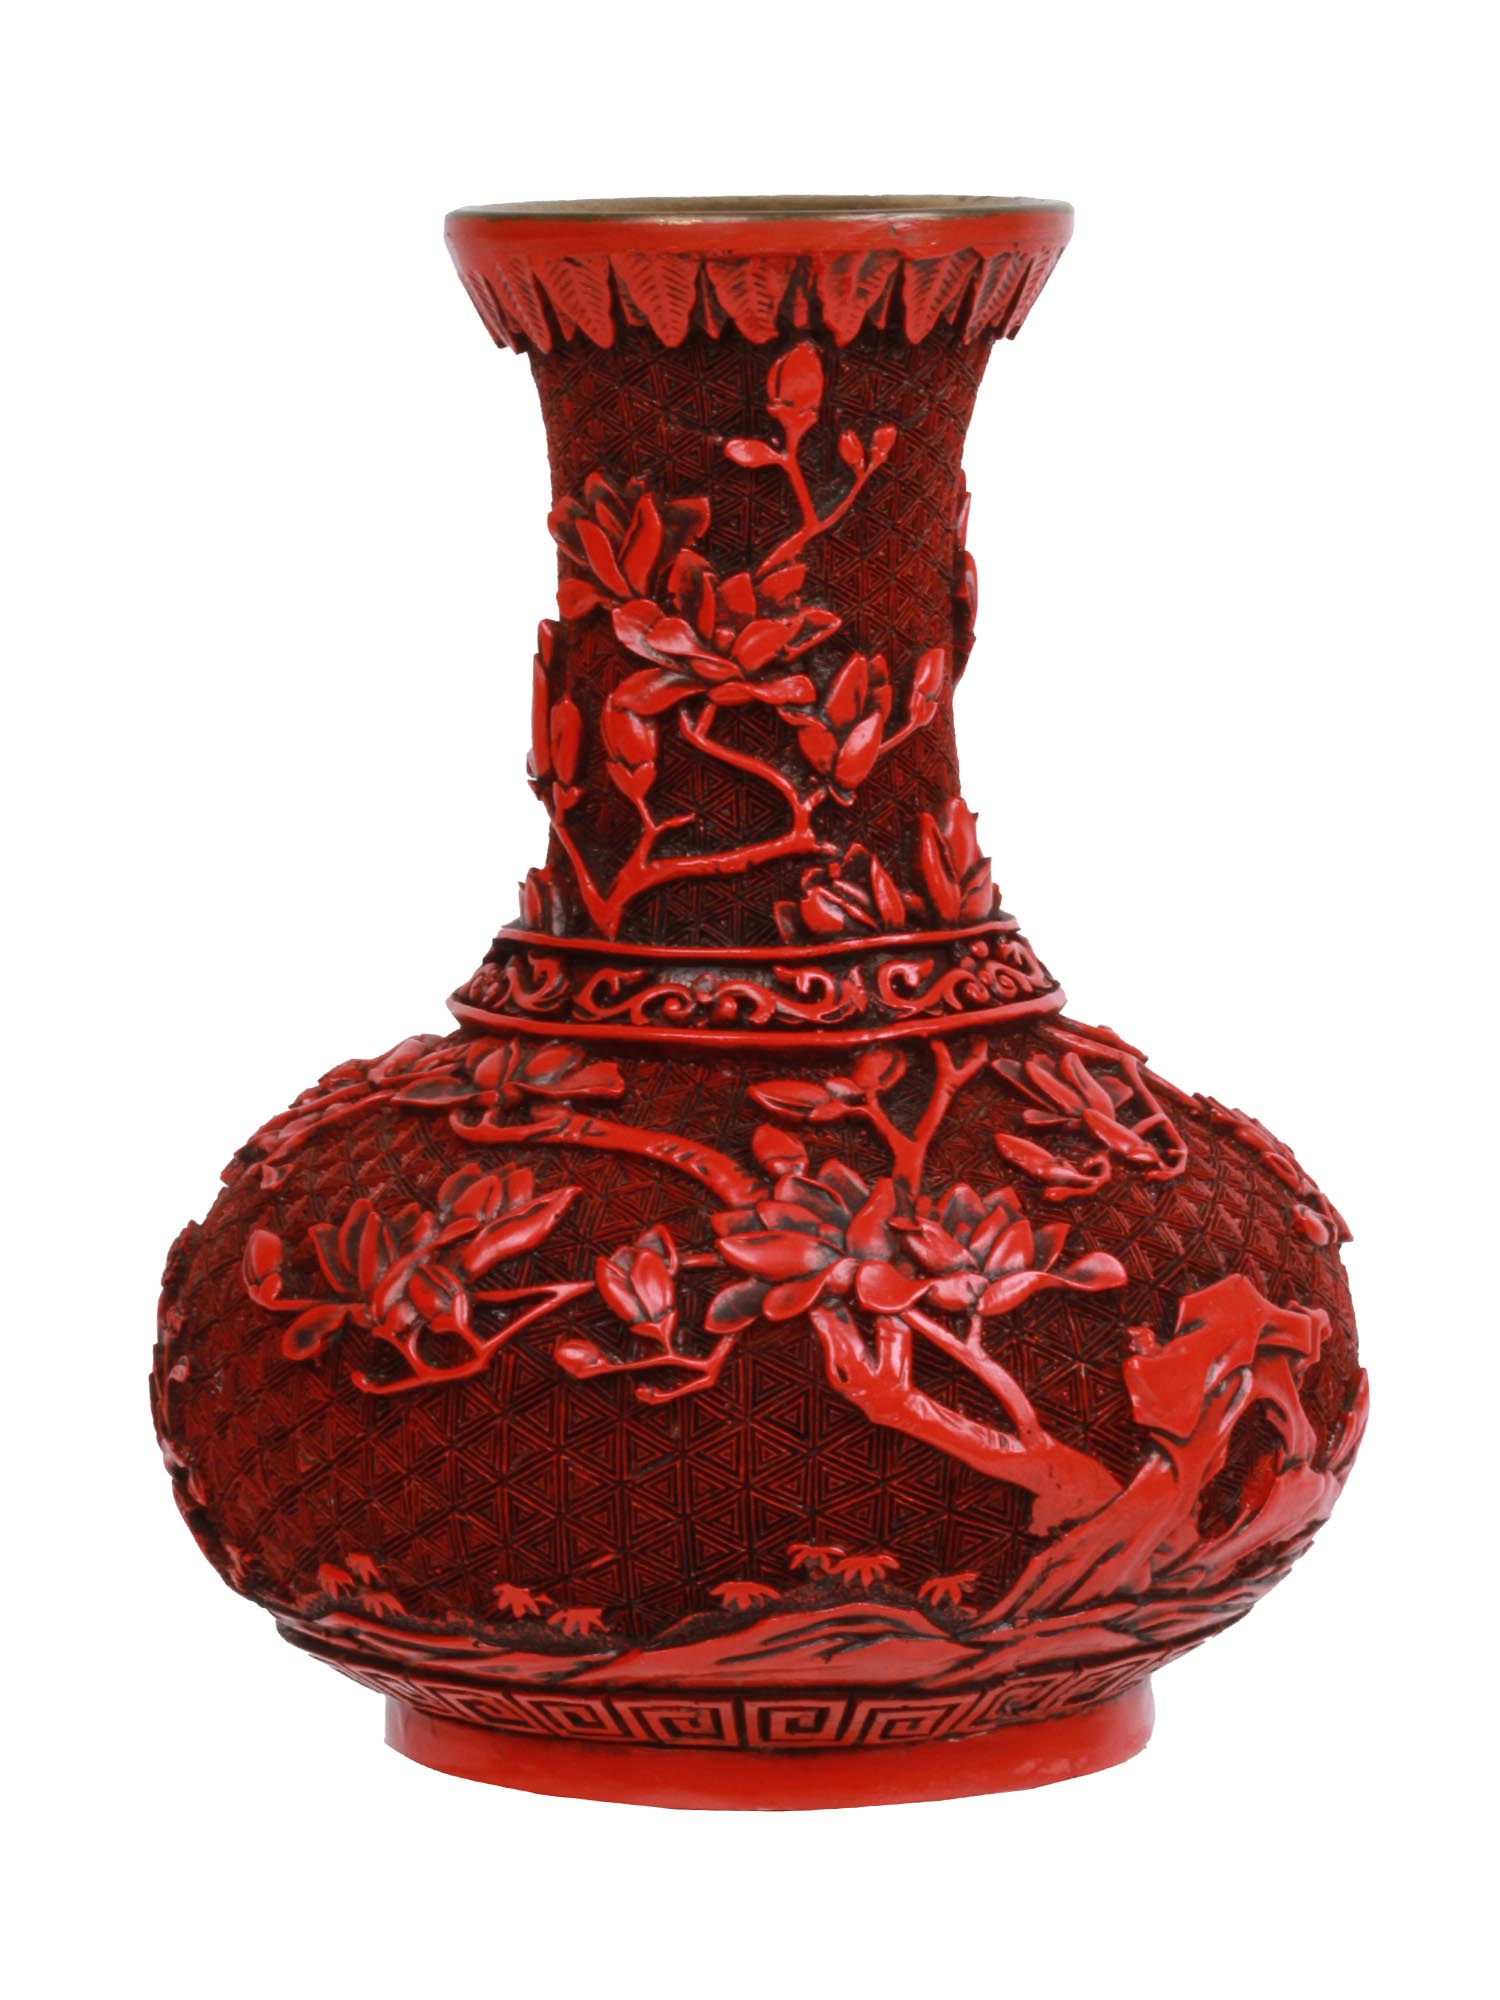 ANTIQUE CHINESE CINNABAR LACQUER BALUSTER VASE PIC-1